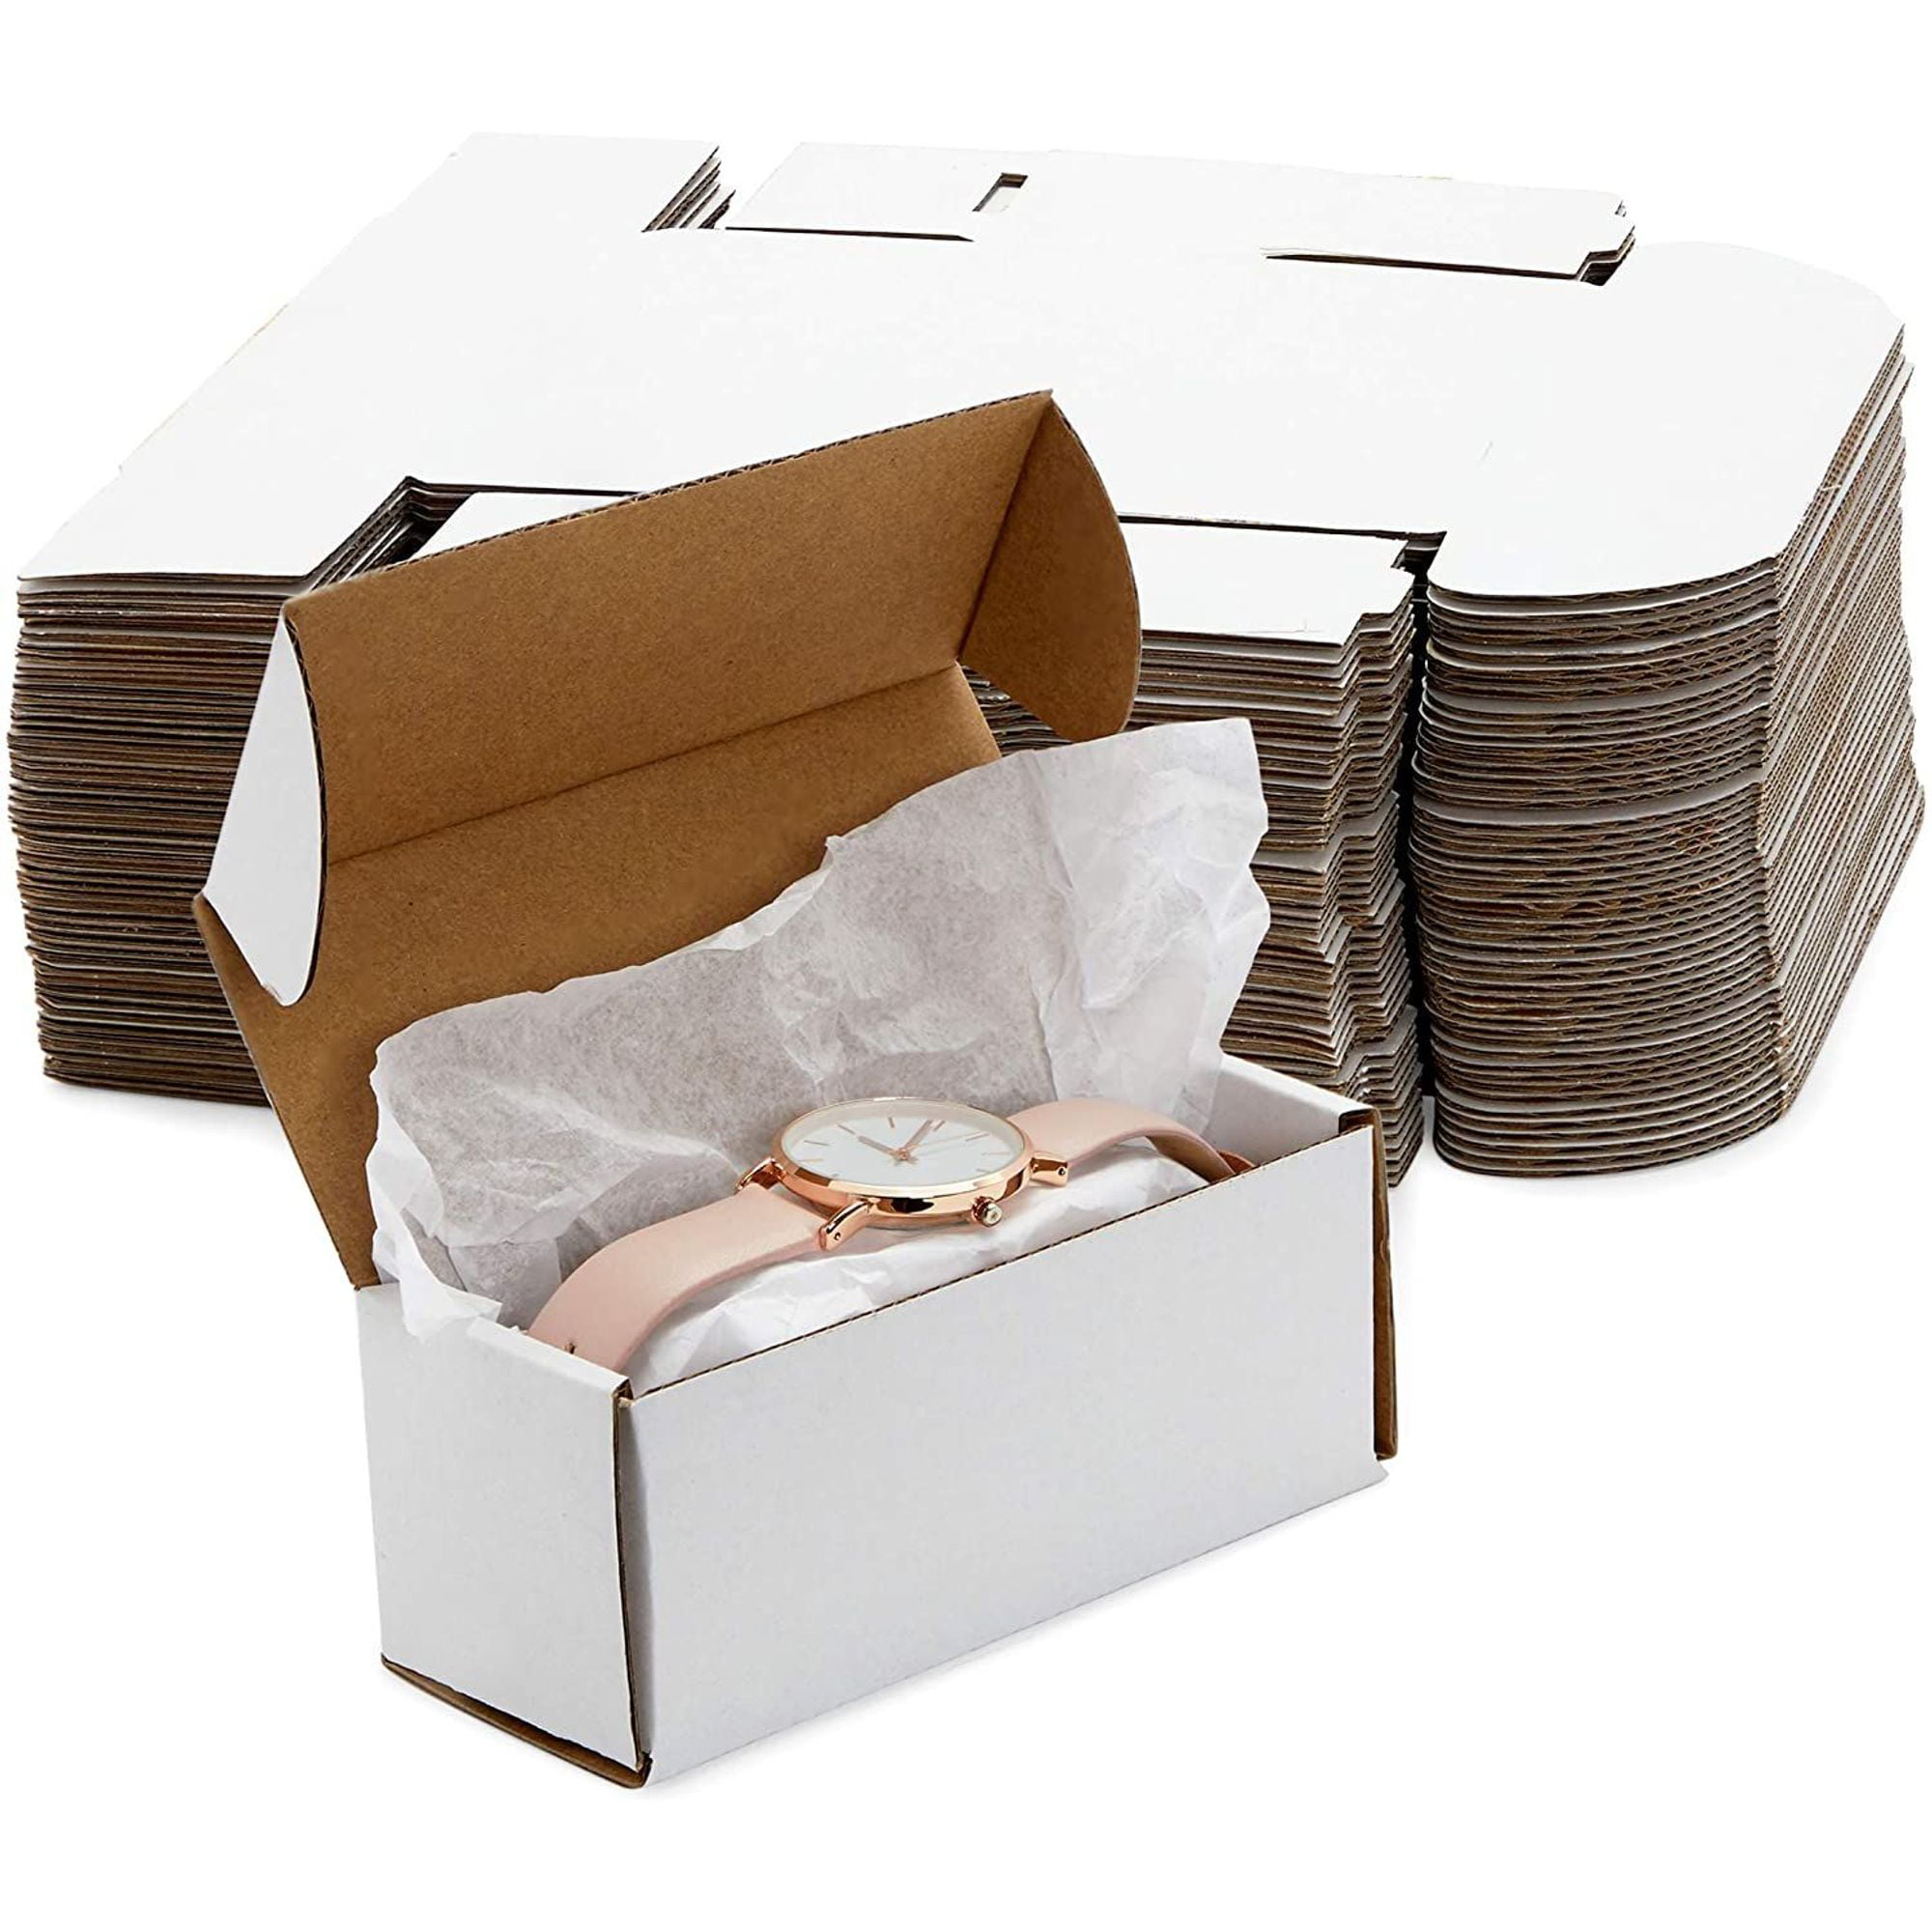 7x5x4" Corrugated Mailer Ships Flat and Fold Together in Seconds